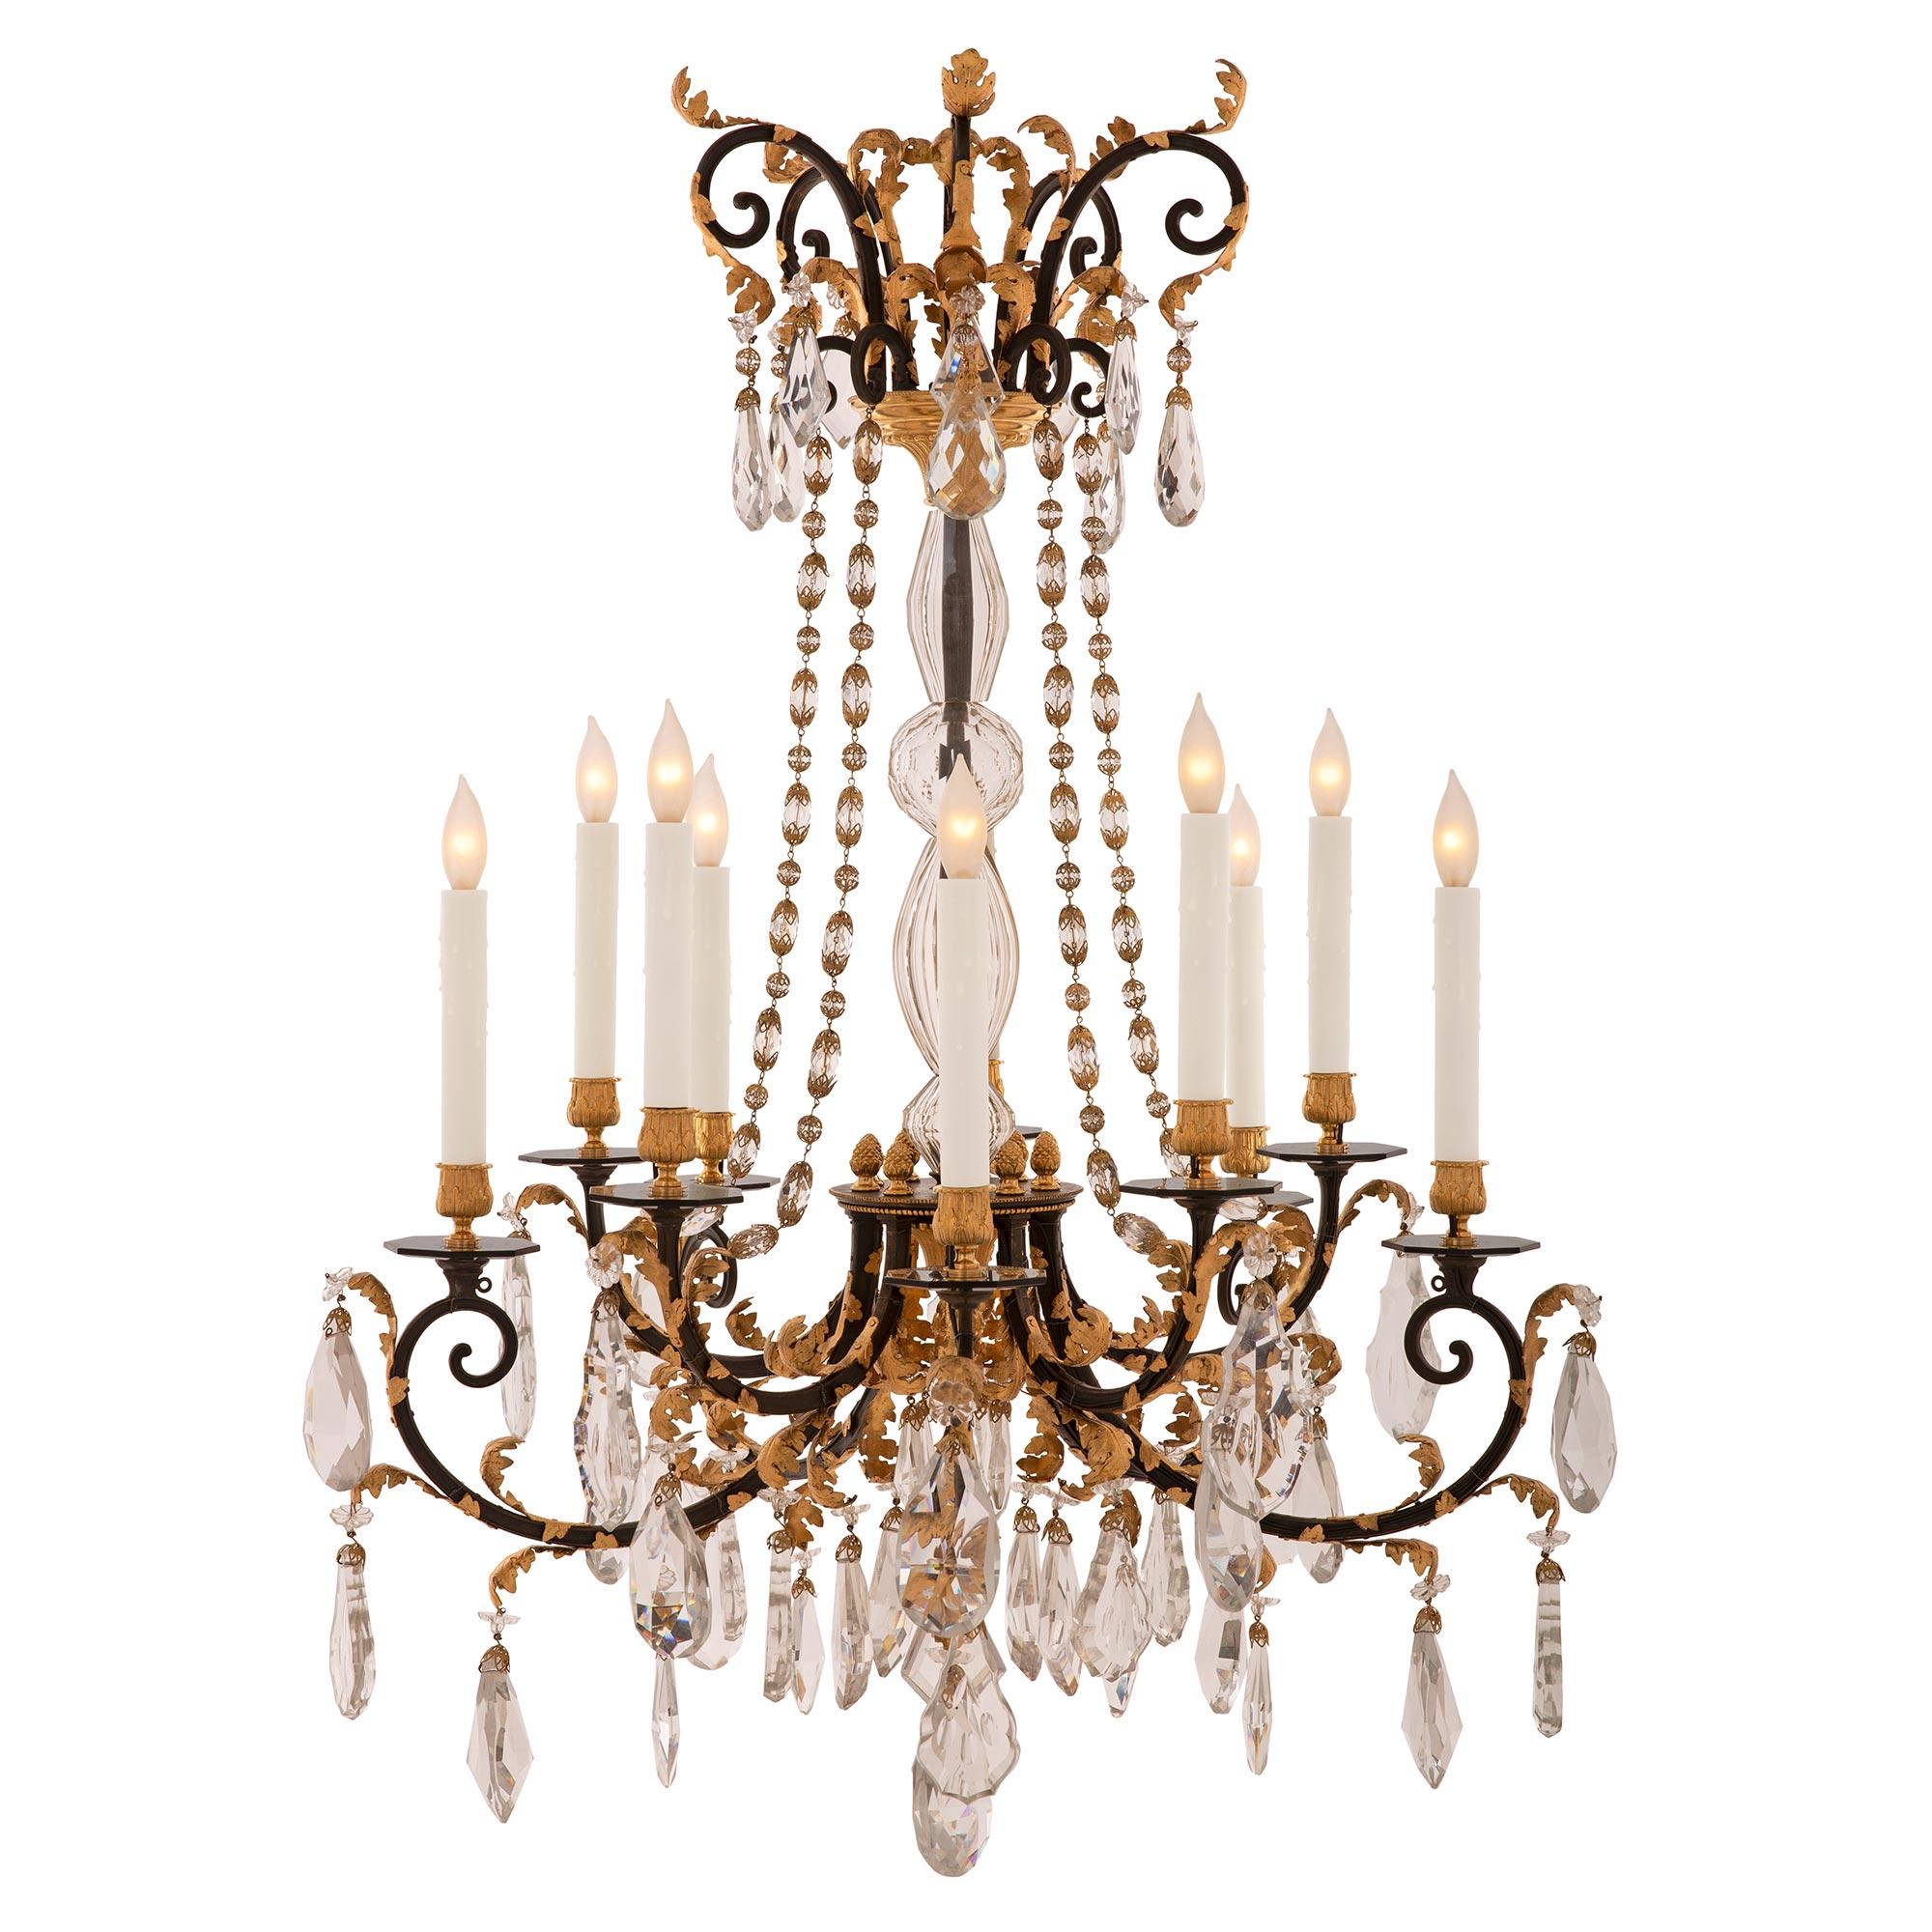 A stunning and very unique French 19th century Louis XVI st. wrought iron, gilt metal, ormolu, and crystal chandelier. The ten arm chandelier is centered by an exceptional and most decorative array of cut and etched crystal pendants below the